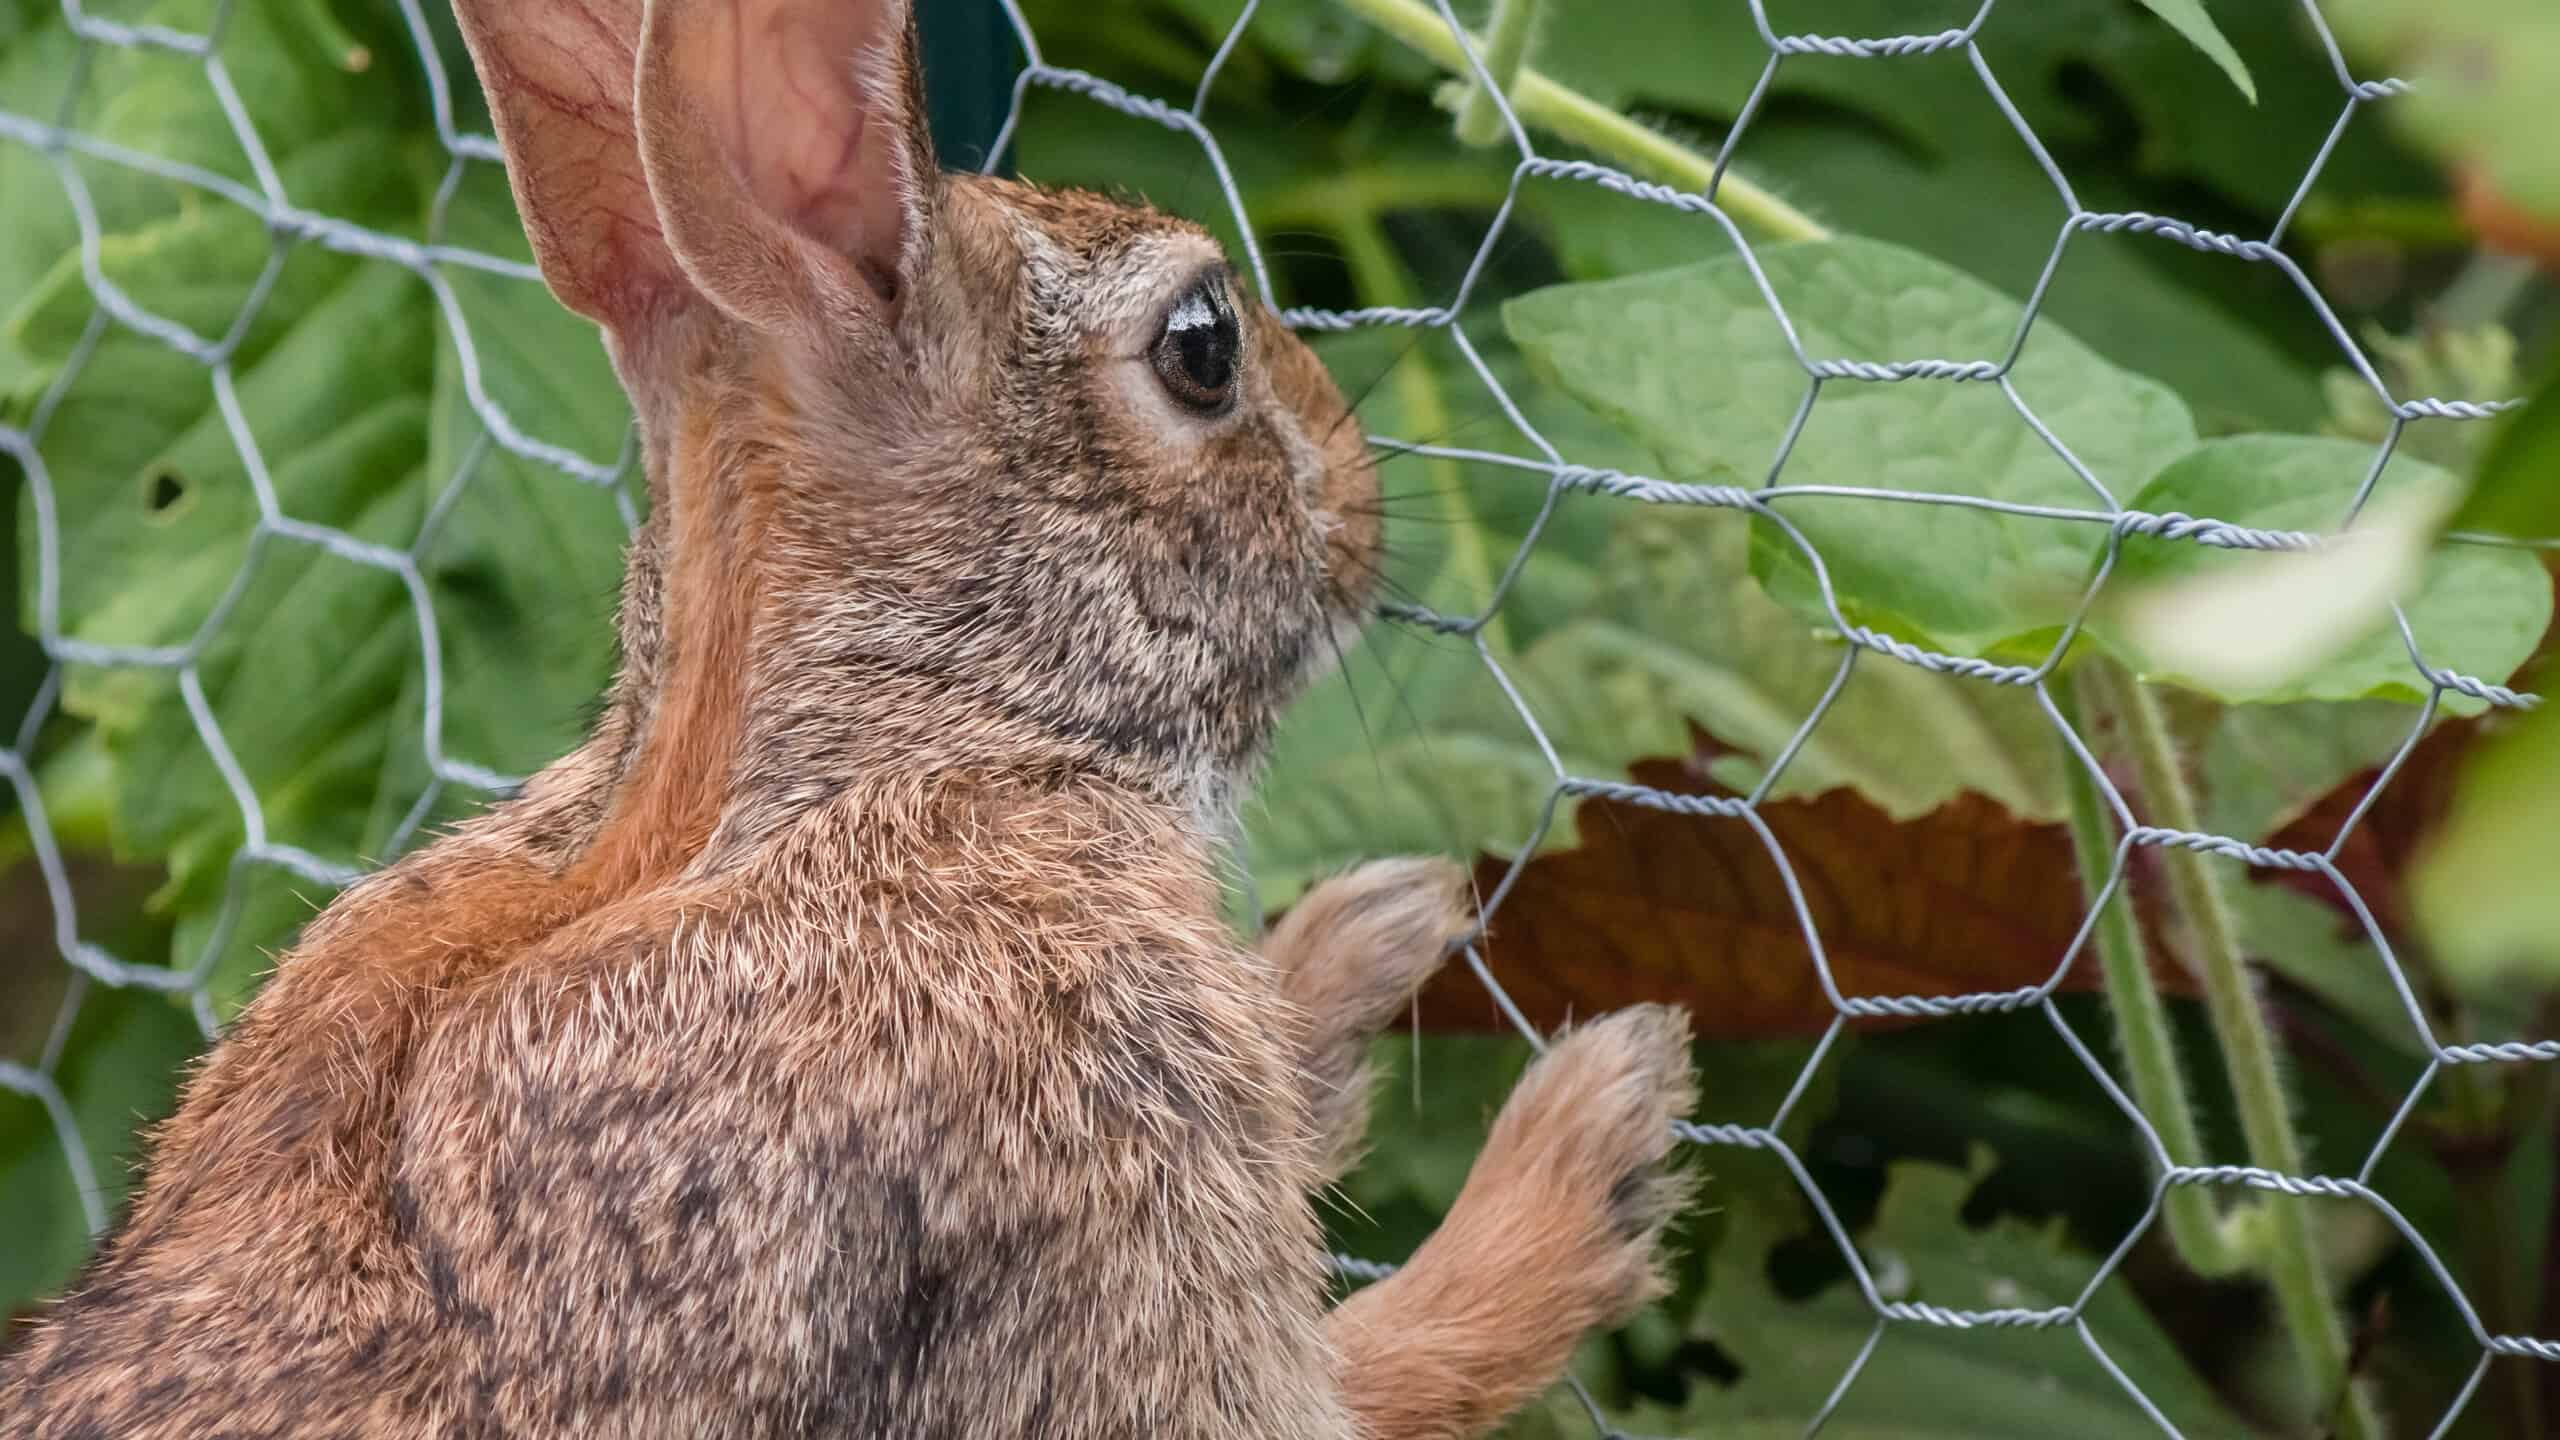 A rabbit stands up and leans on a garden fence, looking into the green garden helplessly.